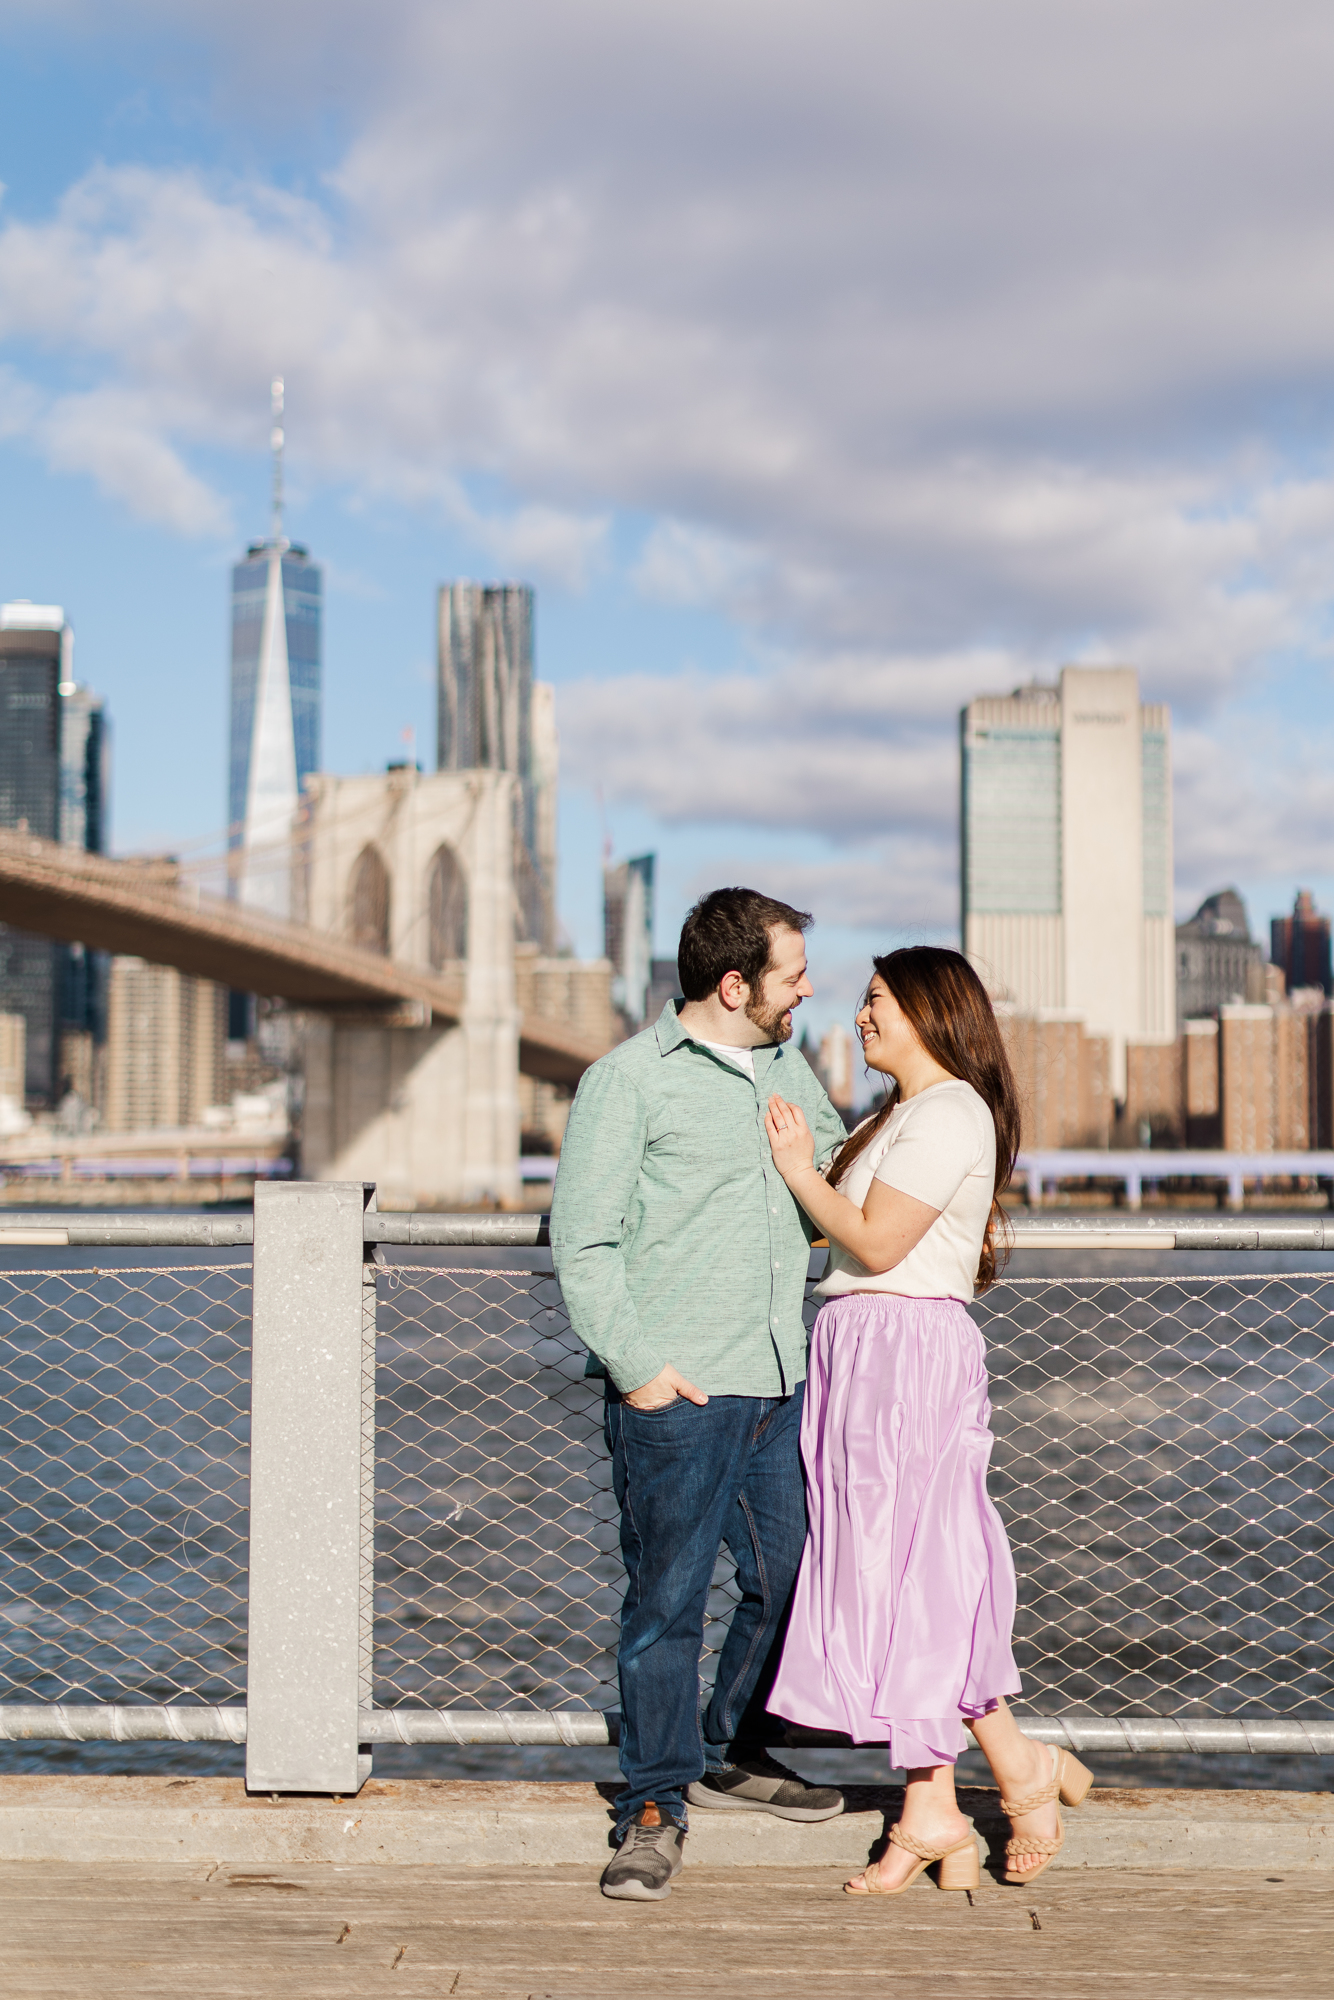 Picturesque Brooklyn Bridge Engagement Photography with Matching Outfits